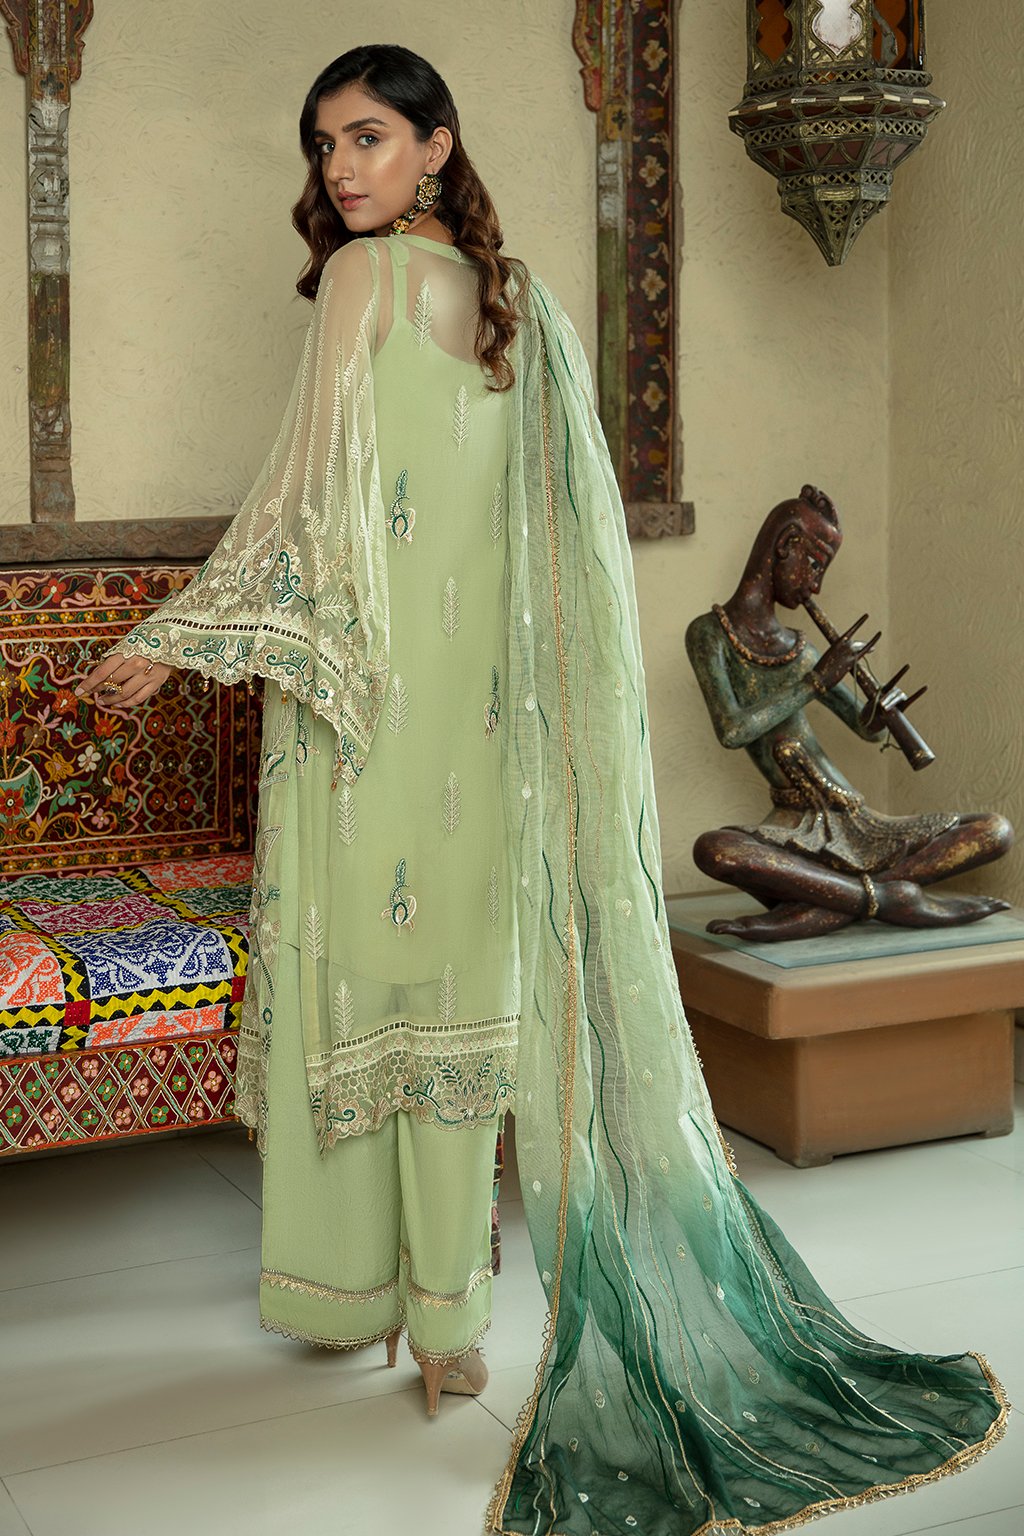 Emaan Adeel Embroidered Chiffon Dress Unstitched 3piece - LE 07